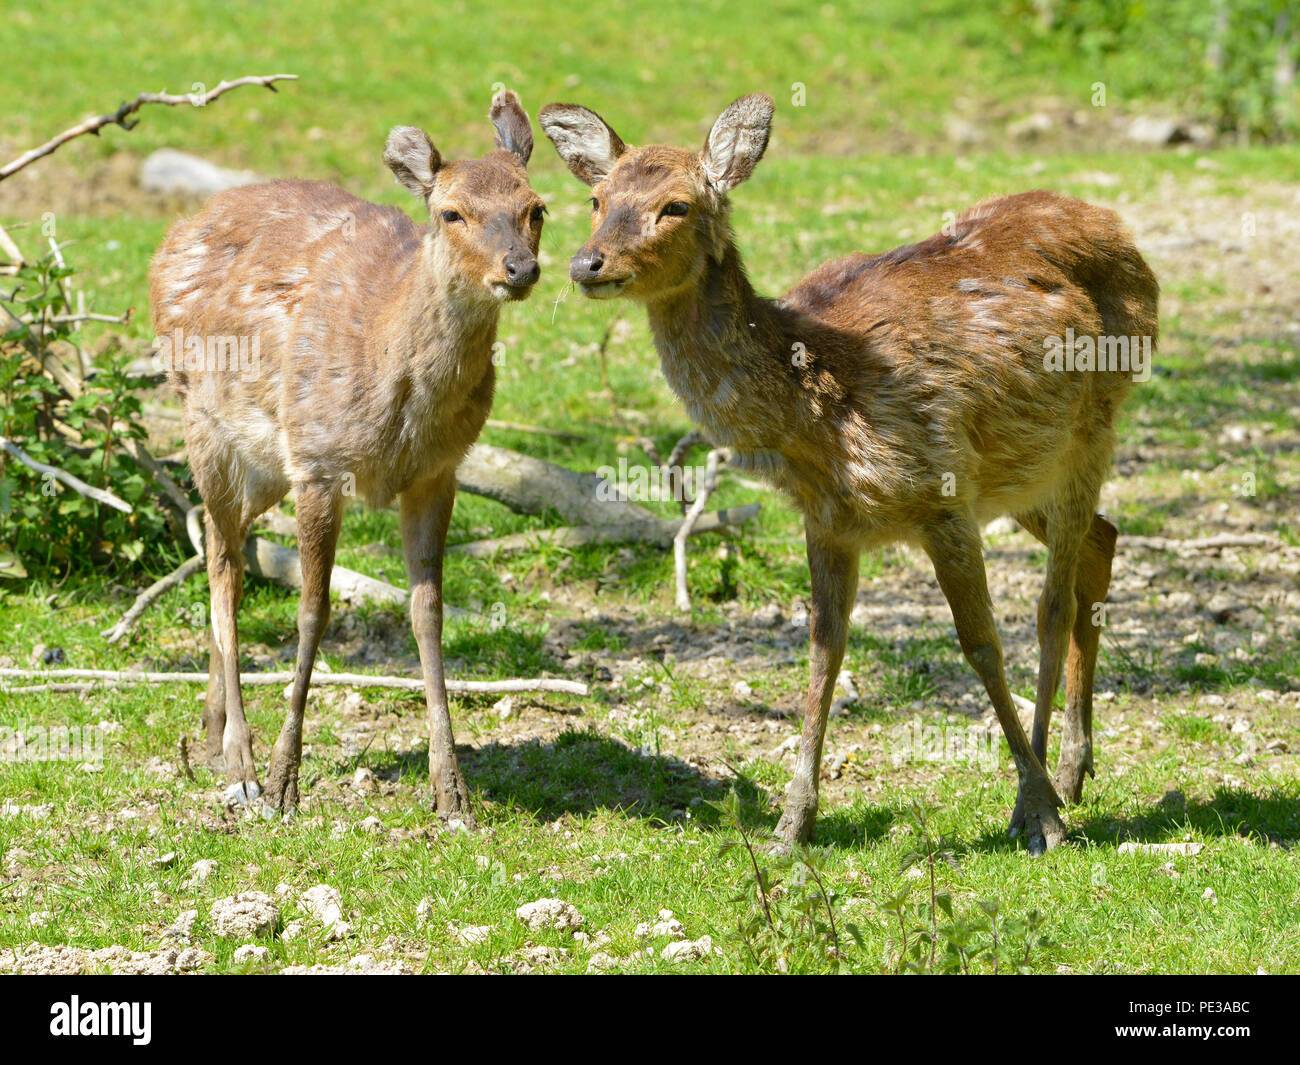 Two females of Vietnamese sika deer (Cervus nippon pseudaxis) standing on grass Stock Photo